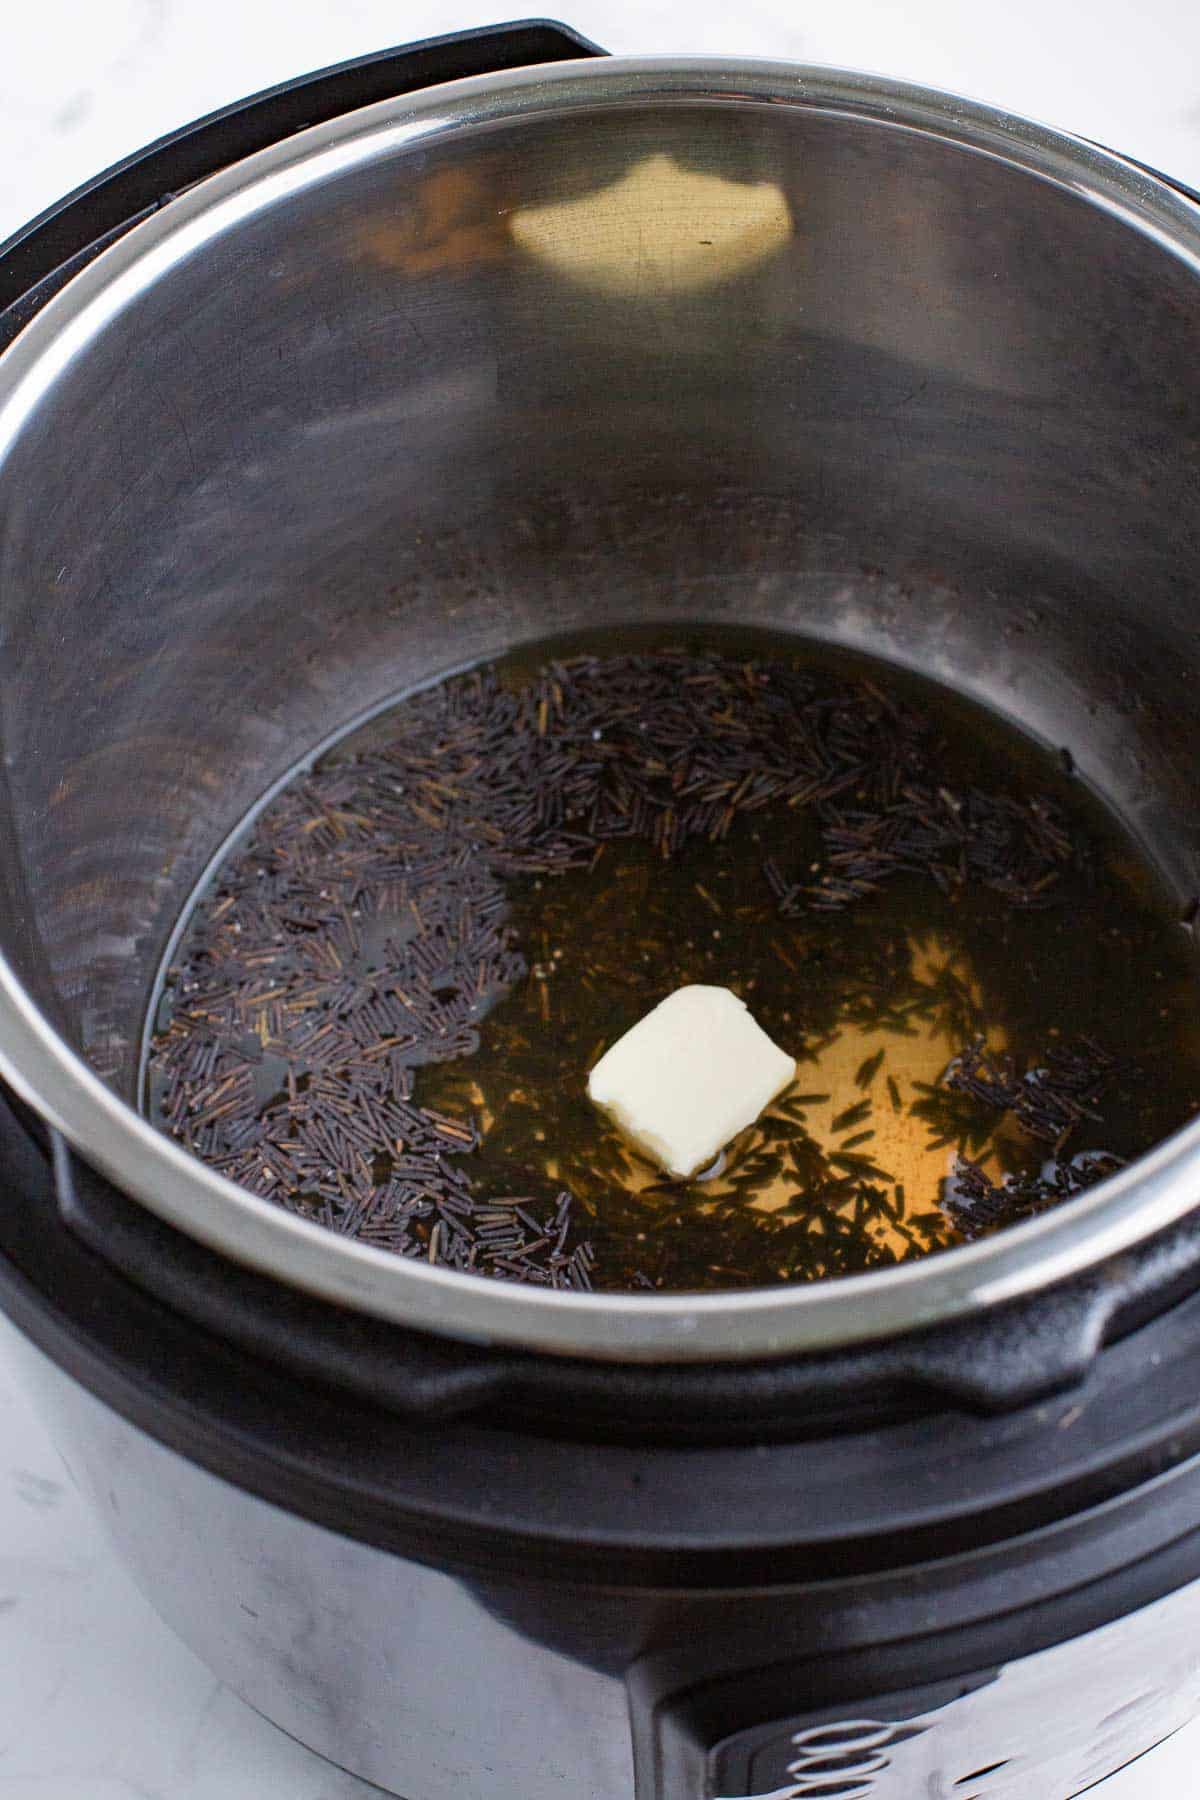 Add the liquid, butter, and rice to the Instant Pot.